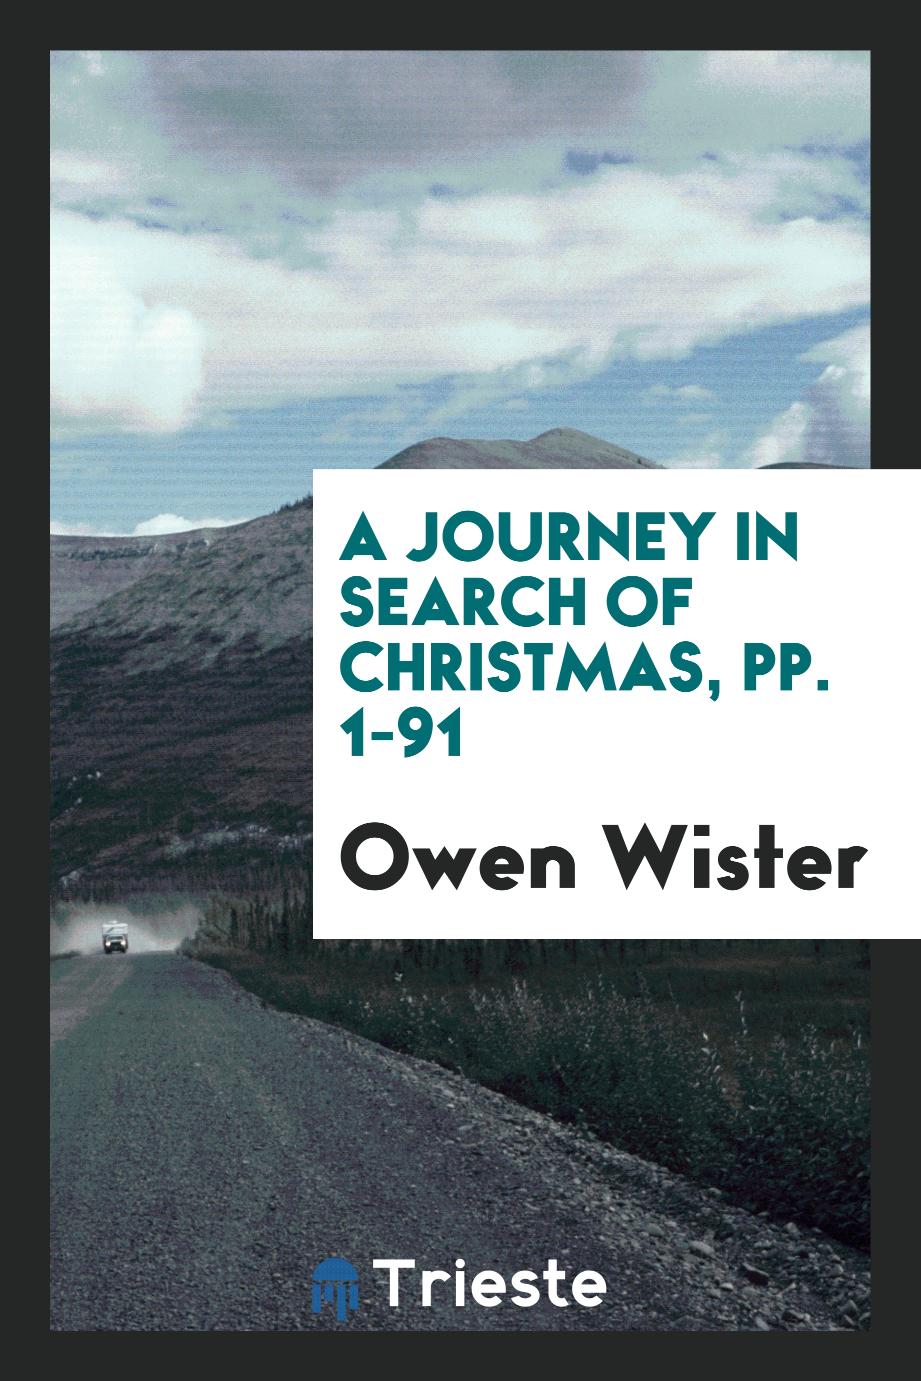 A Journey in Search of Christmas, pp. 1-91